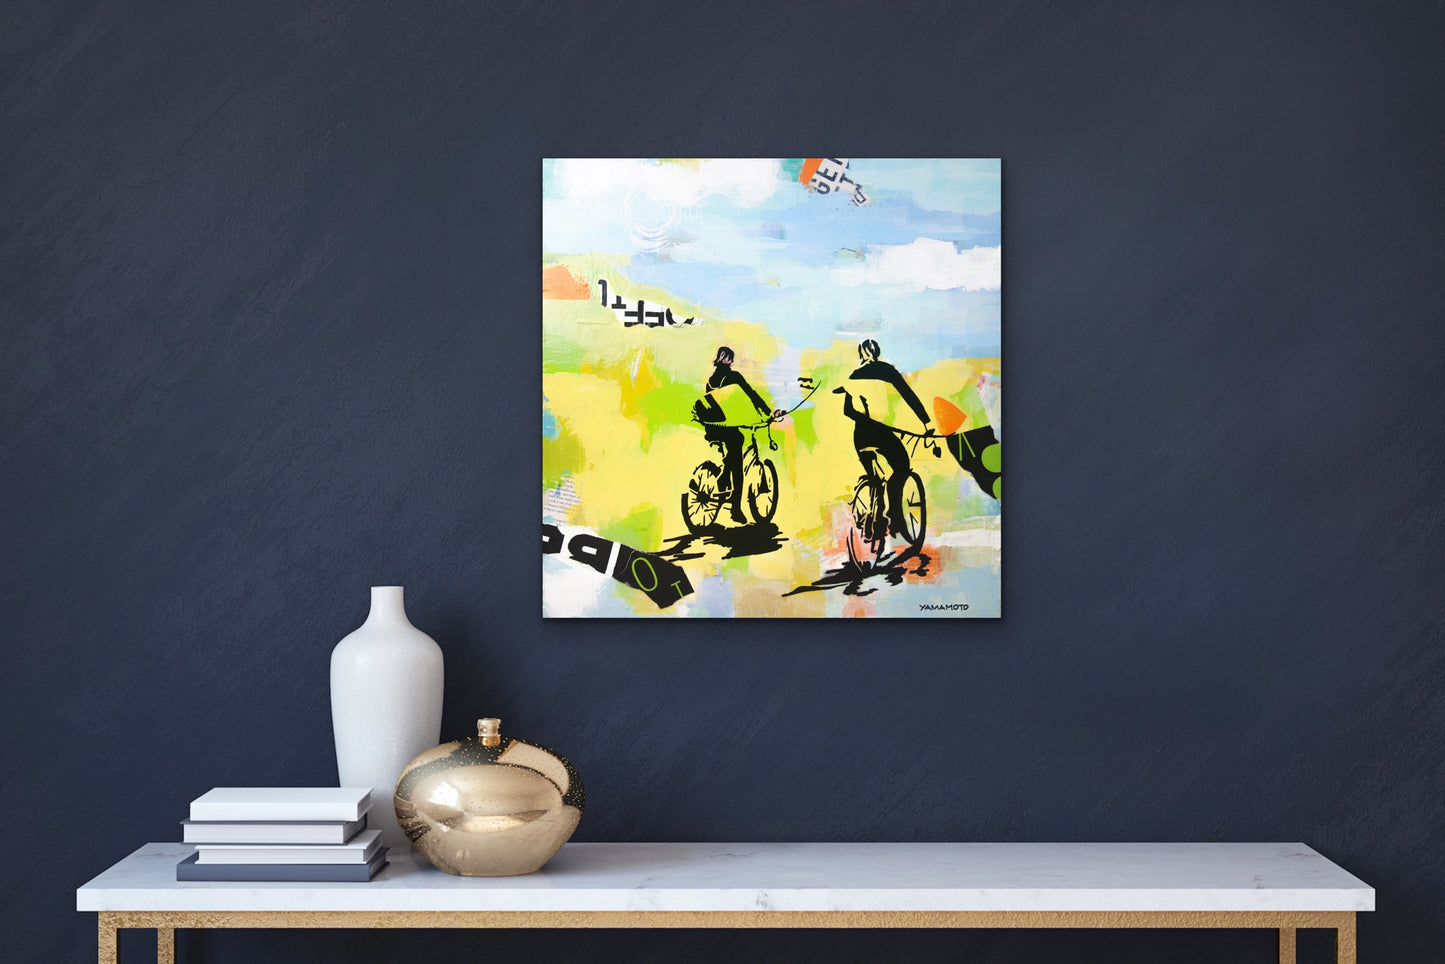 Sanoa's Bliss - girls with surfboards riding at the ocean, wall art